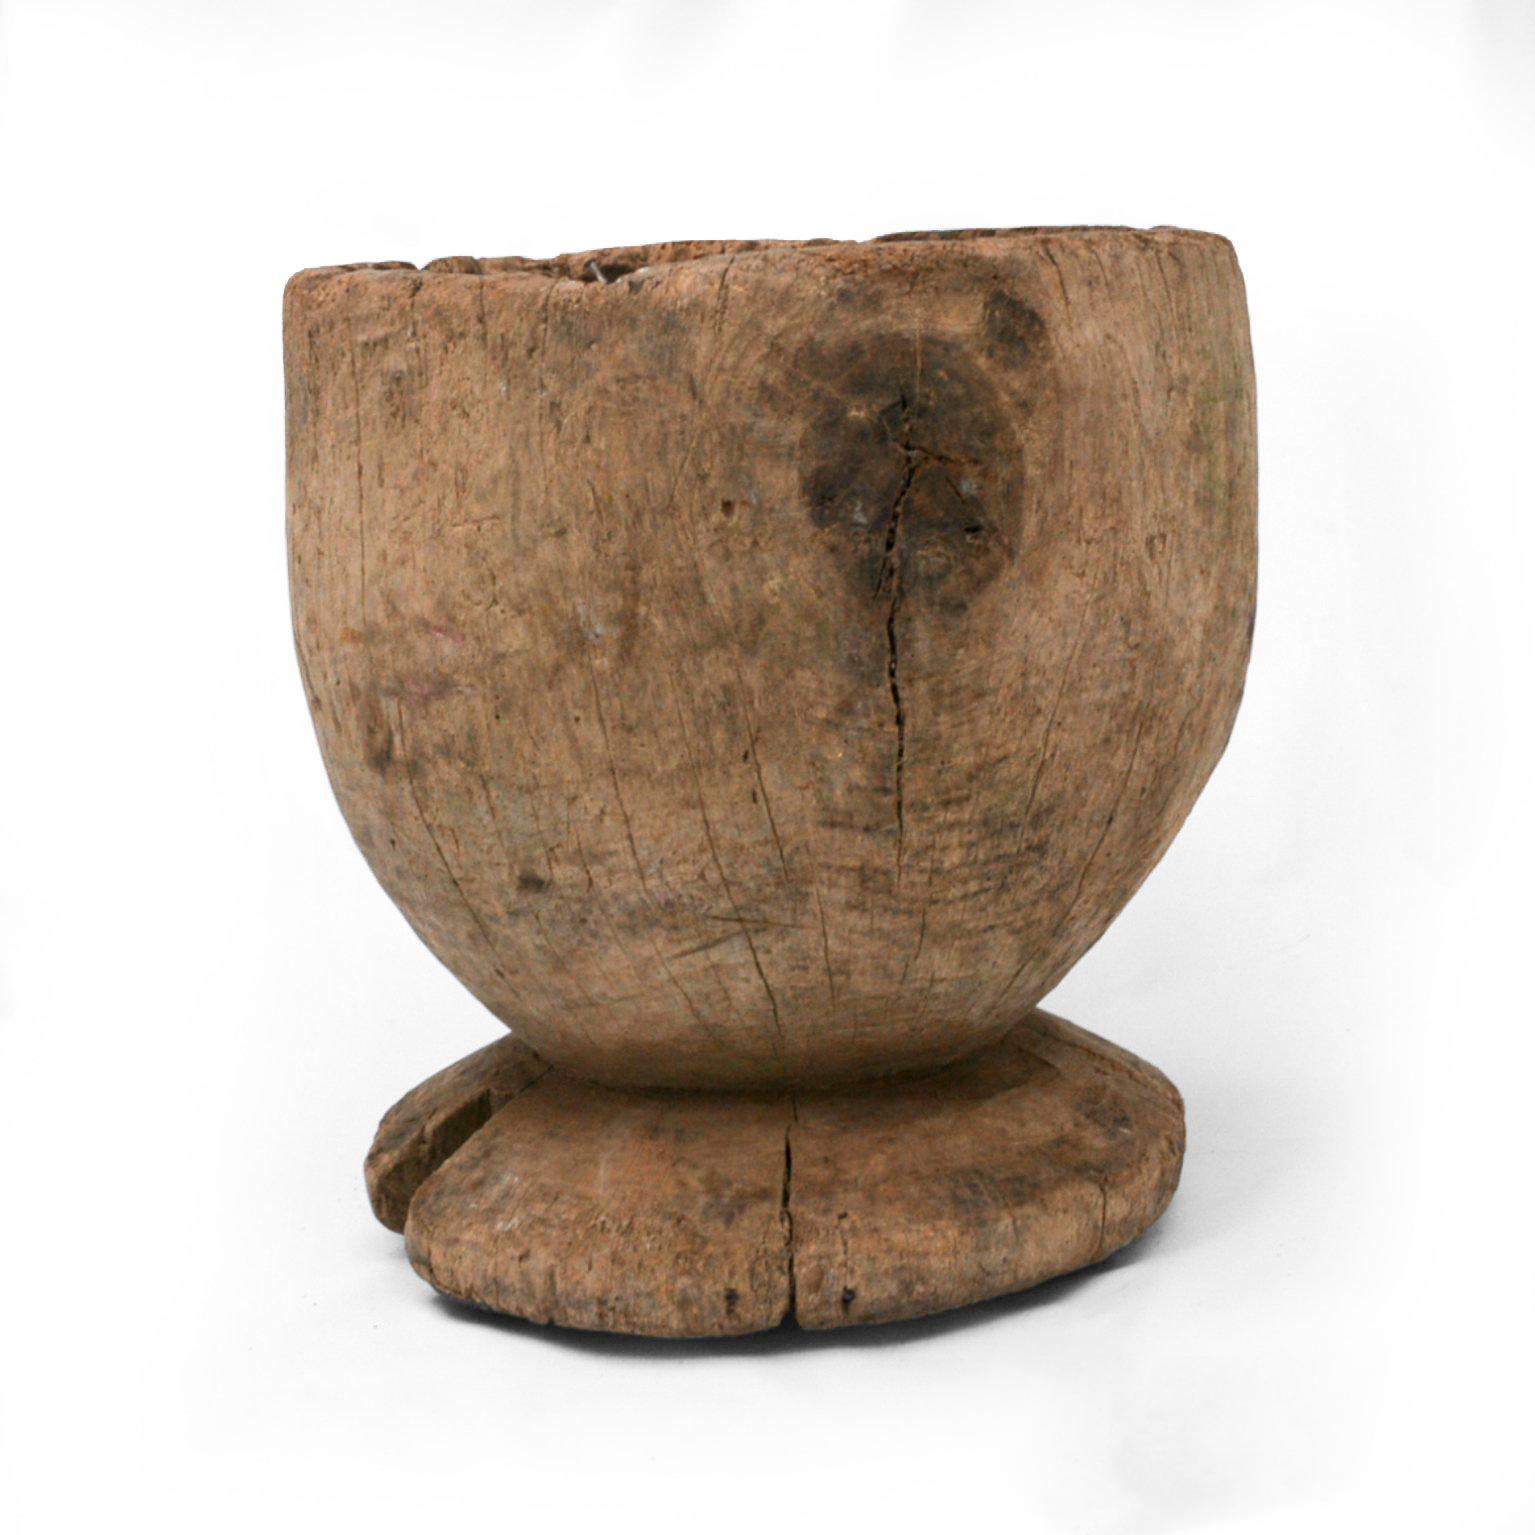 For your consideration an antique wood mortar constructed of one single block of wood. 
Original unrestored condition. 

Vintage patina present. Cracks and stains present. 

Sabino wood from the region of Oaxaca Mexico. 
No marking present